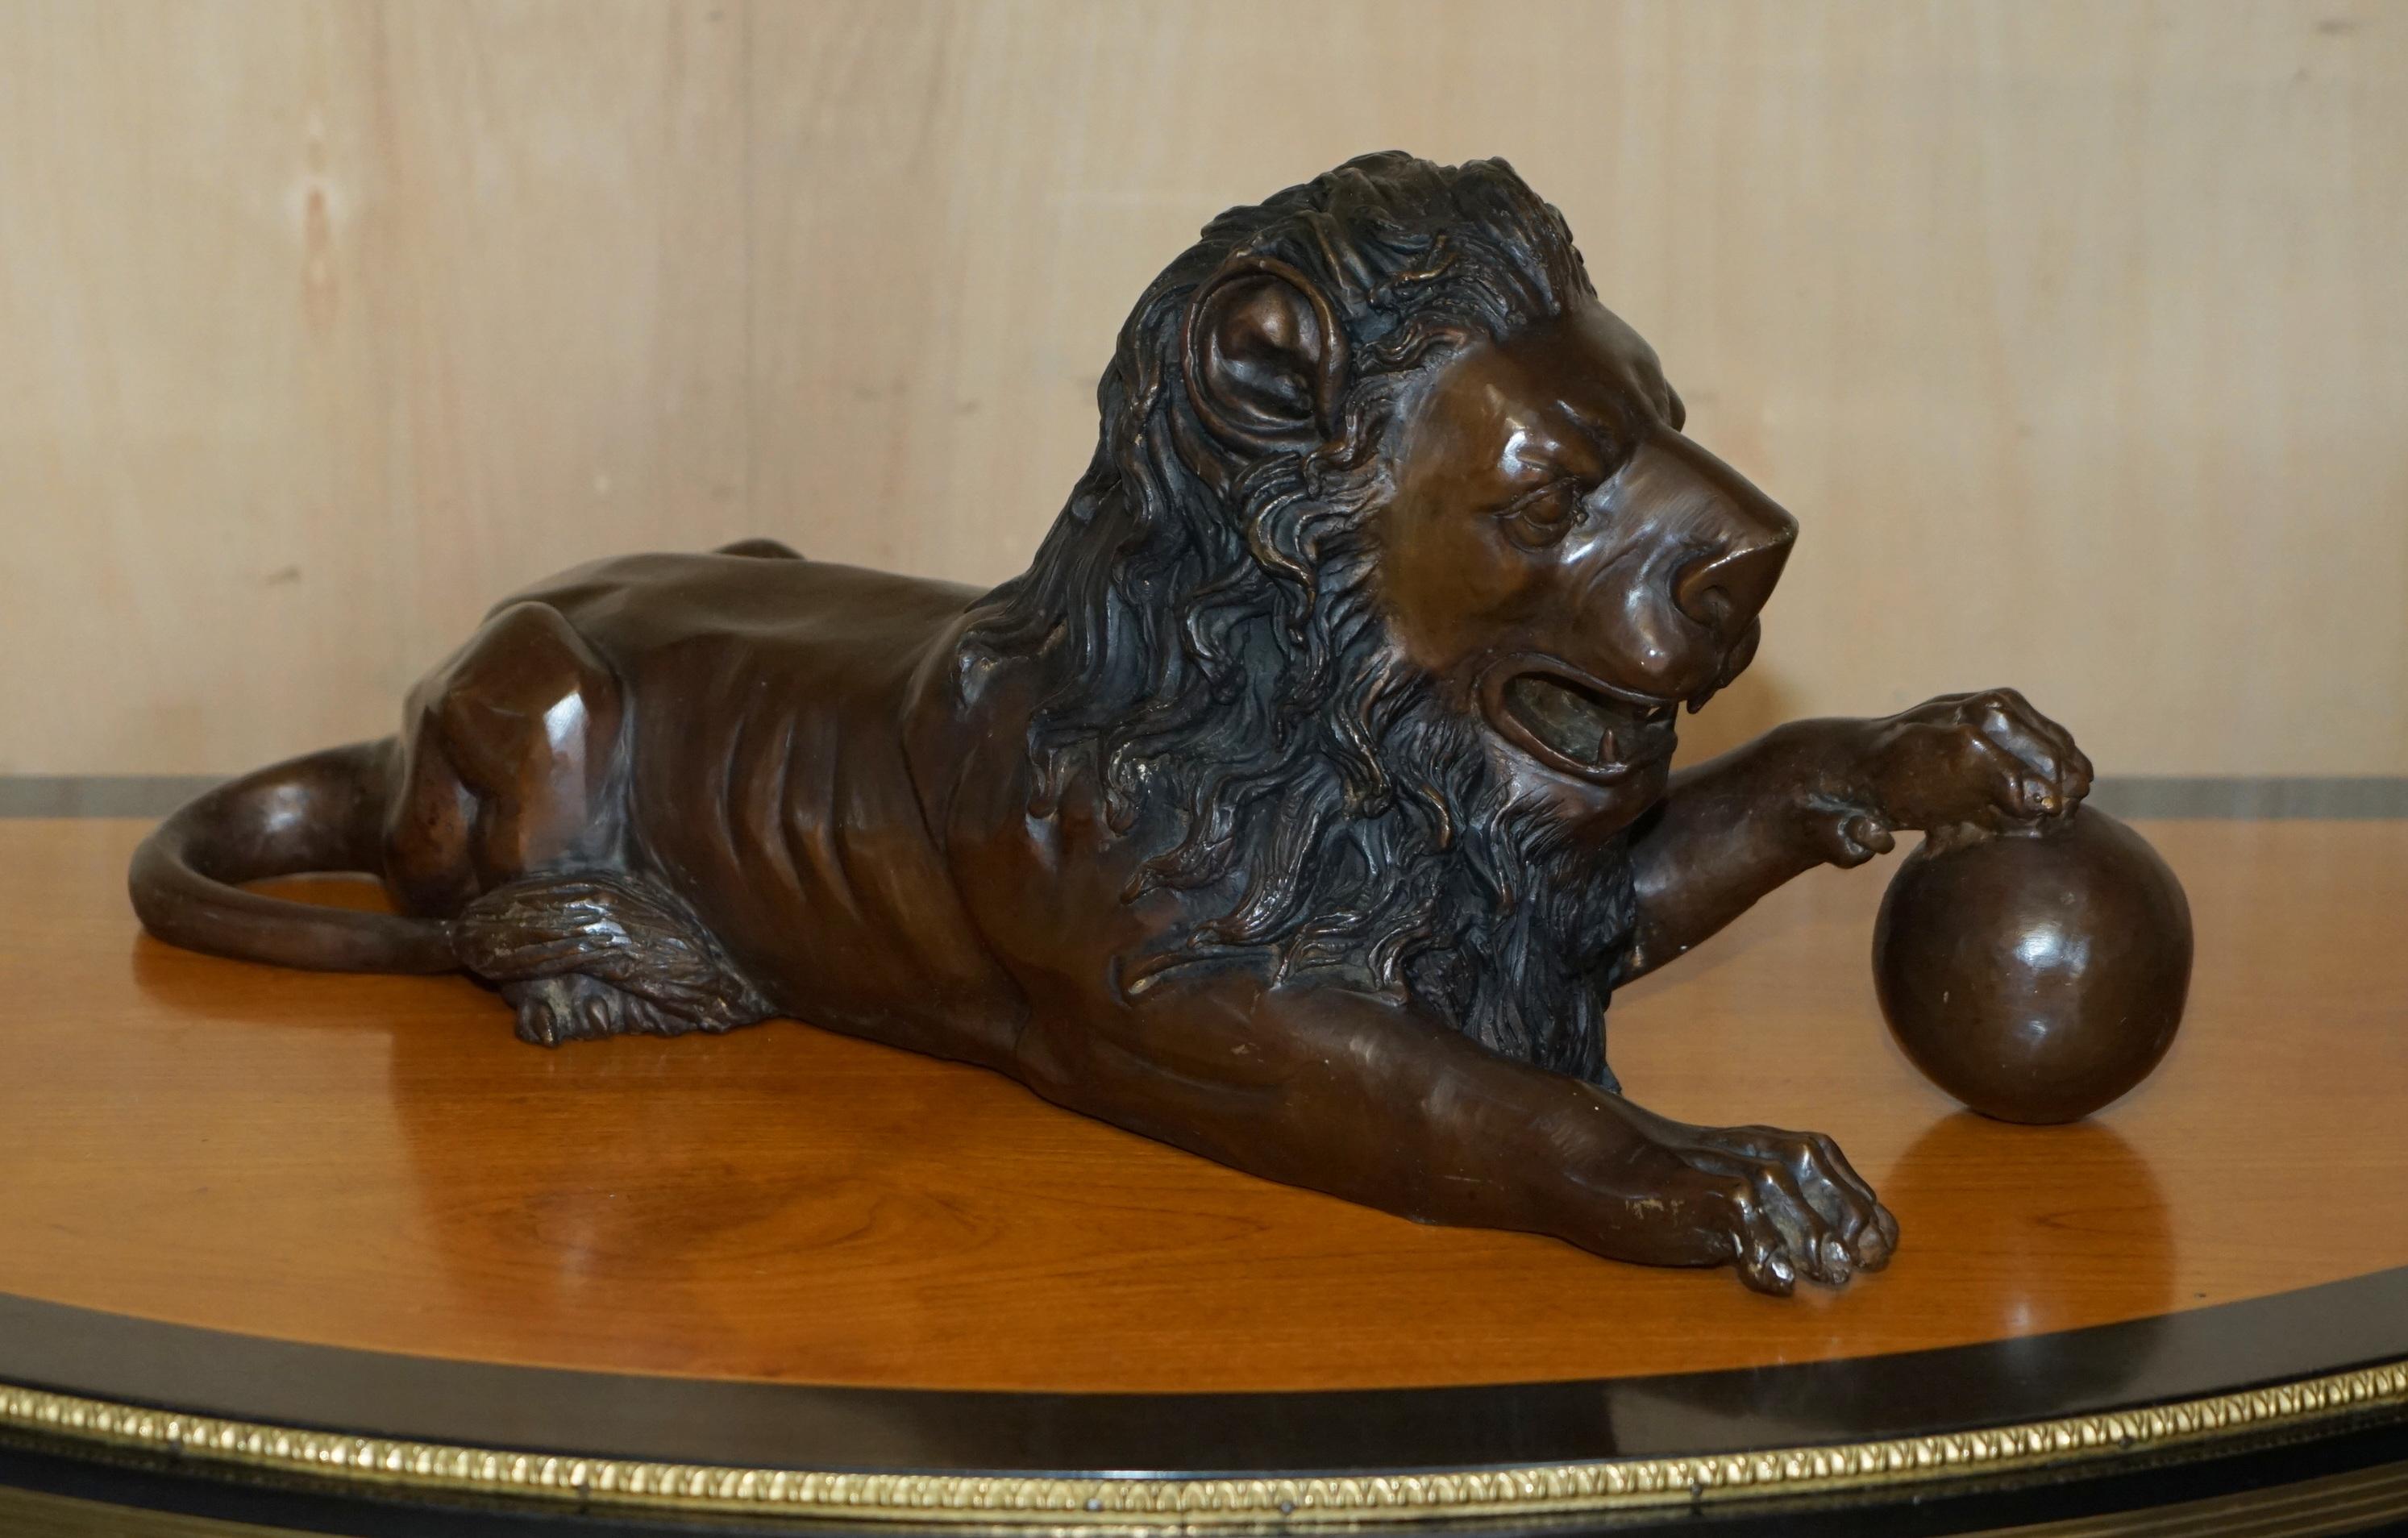 Royal House Antiques

Royal House Antiques is delighted to offer for sale this stunning pair of early 20th century bronze statues of Recumbent Lions resting with balls under their paws 

These are lovely large statues, they work perfectly on a